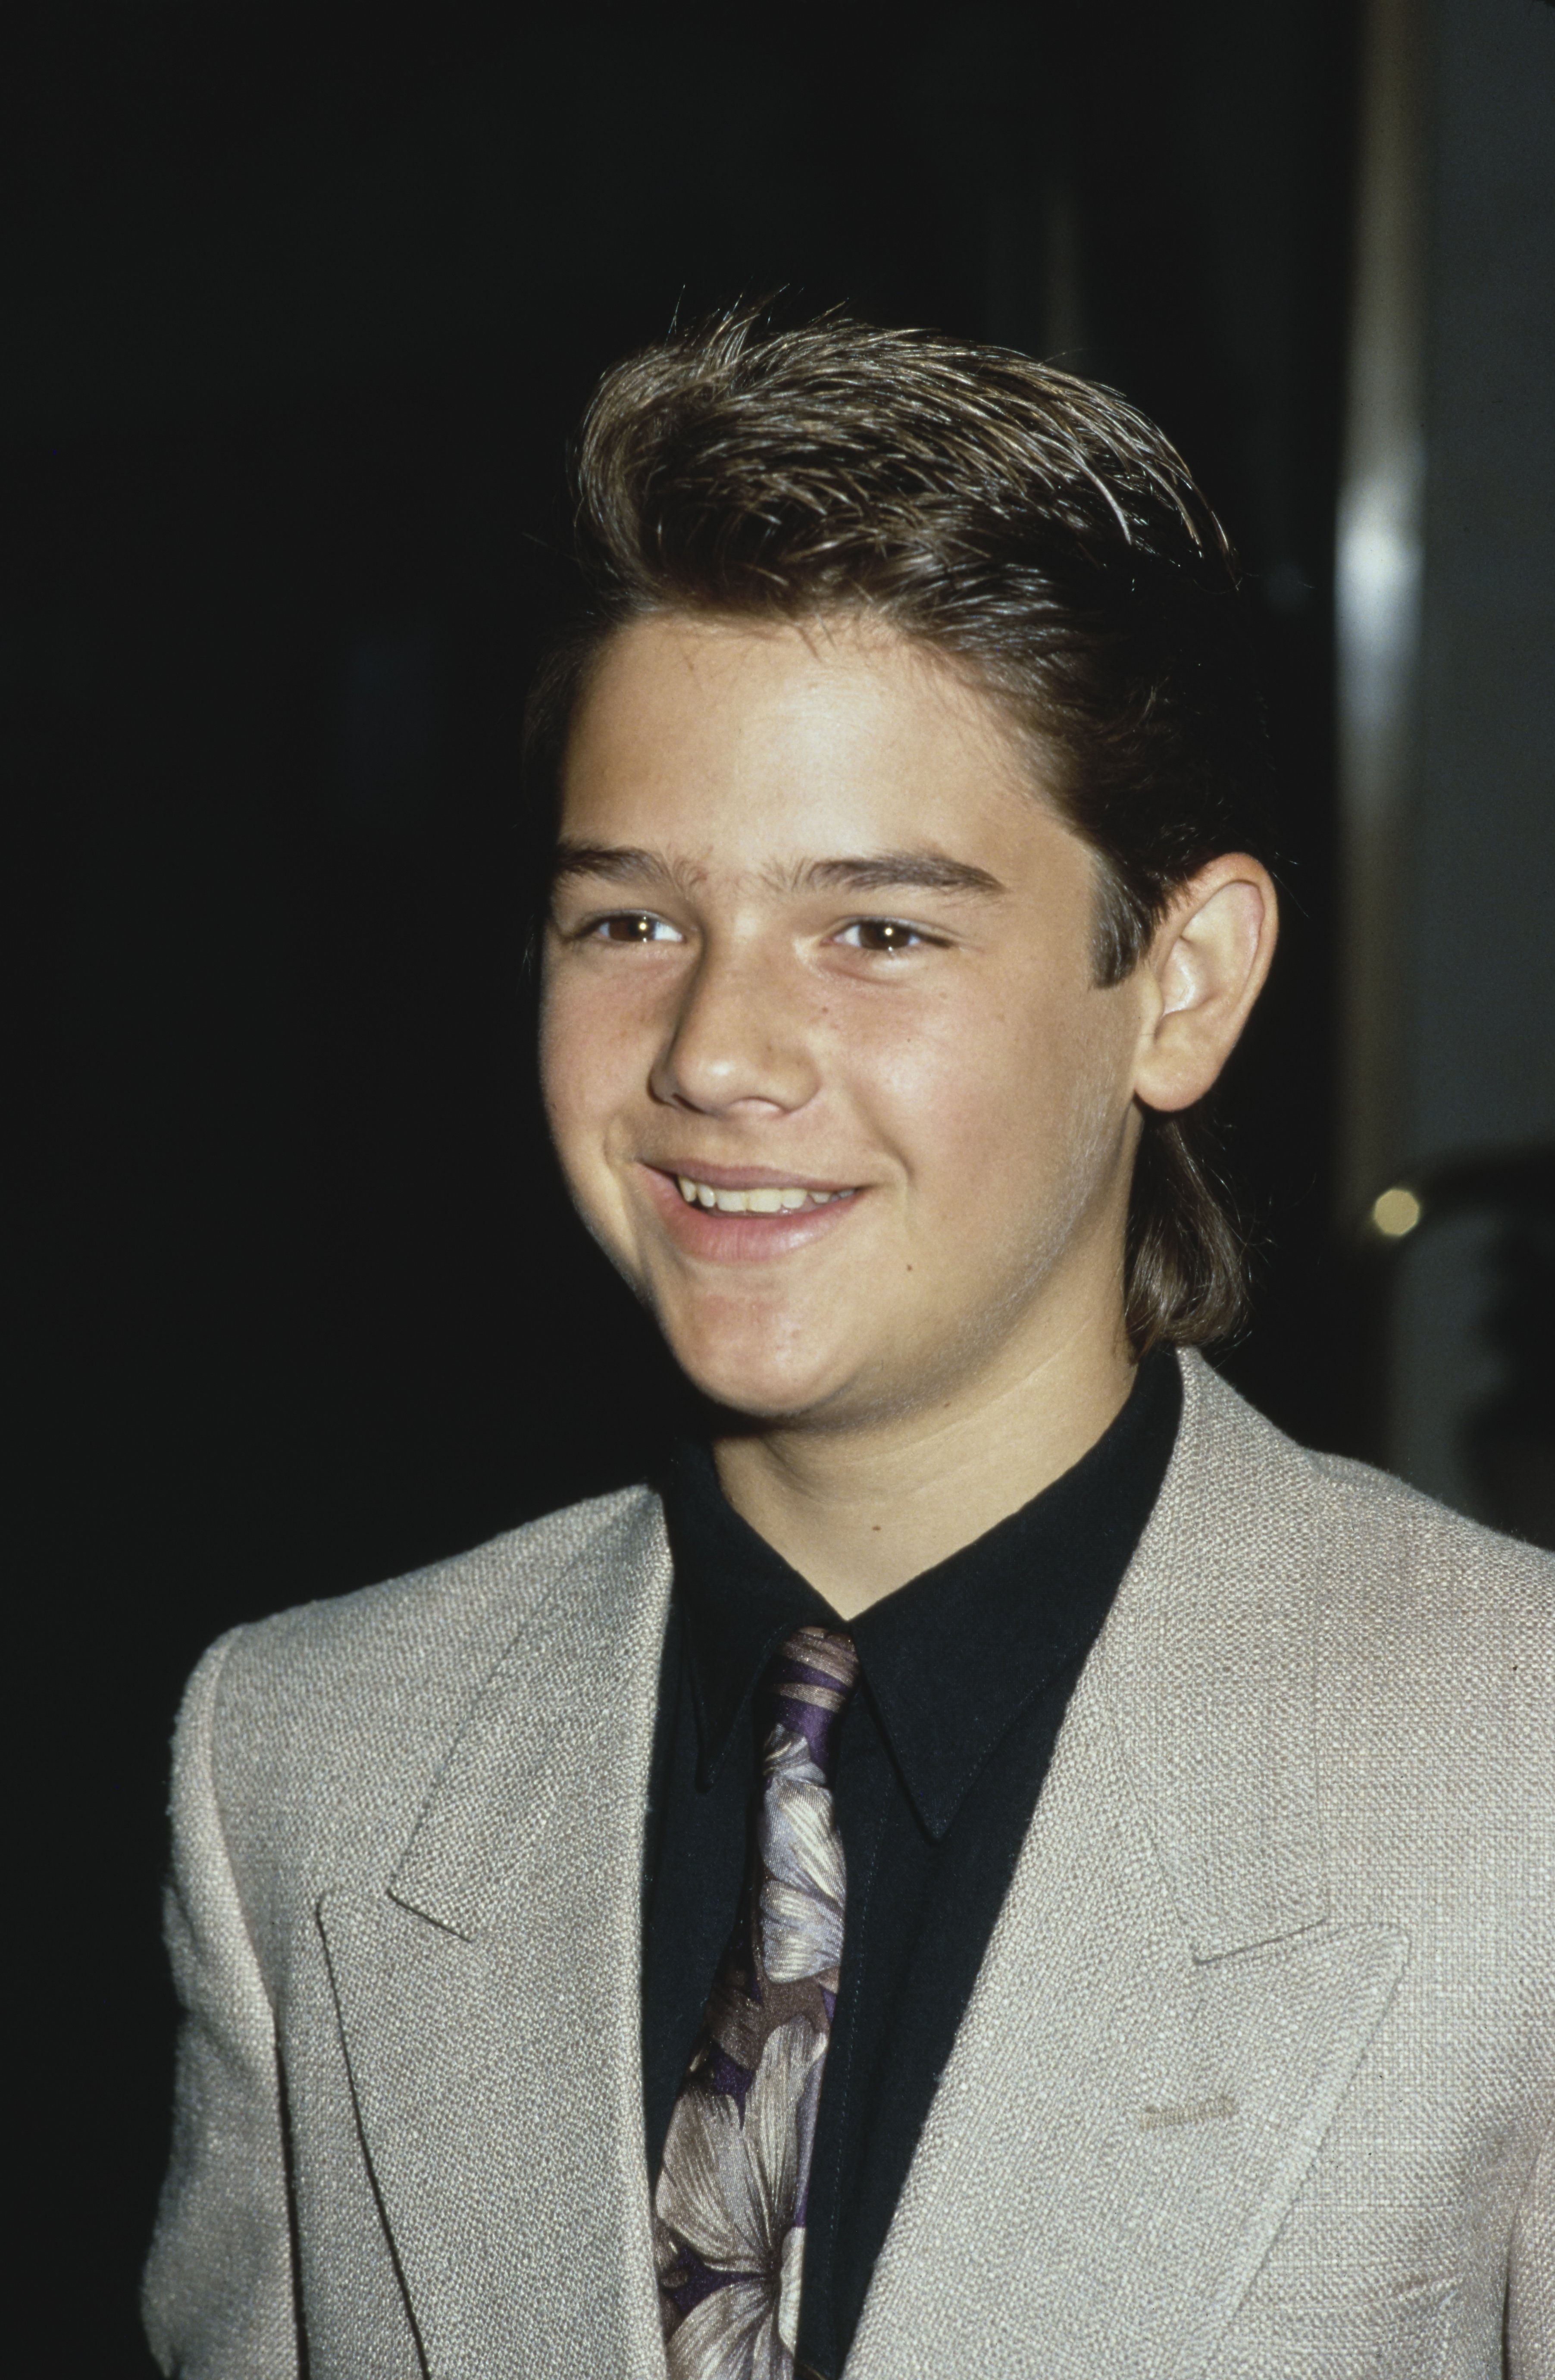 Brandon Call at an event in the United States circa 1991 | Source: Getty Images